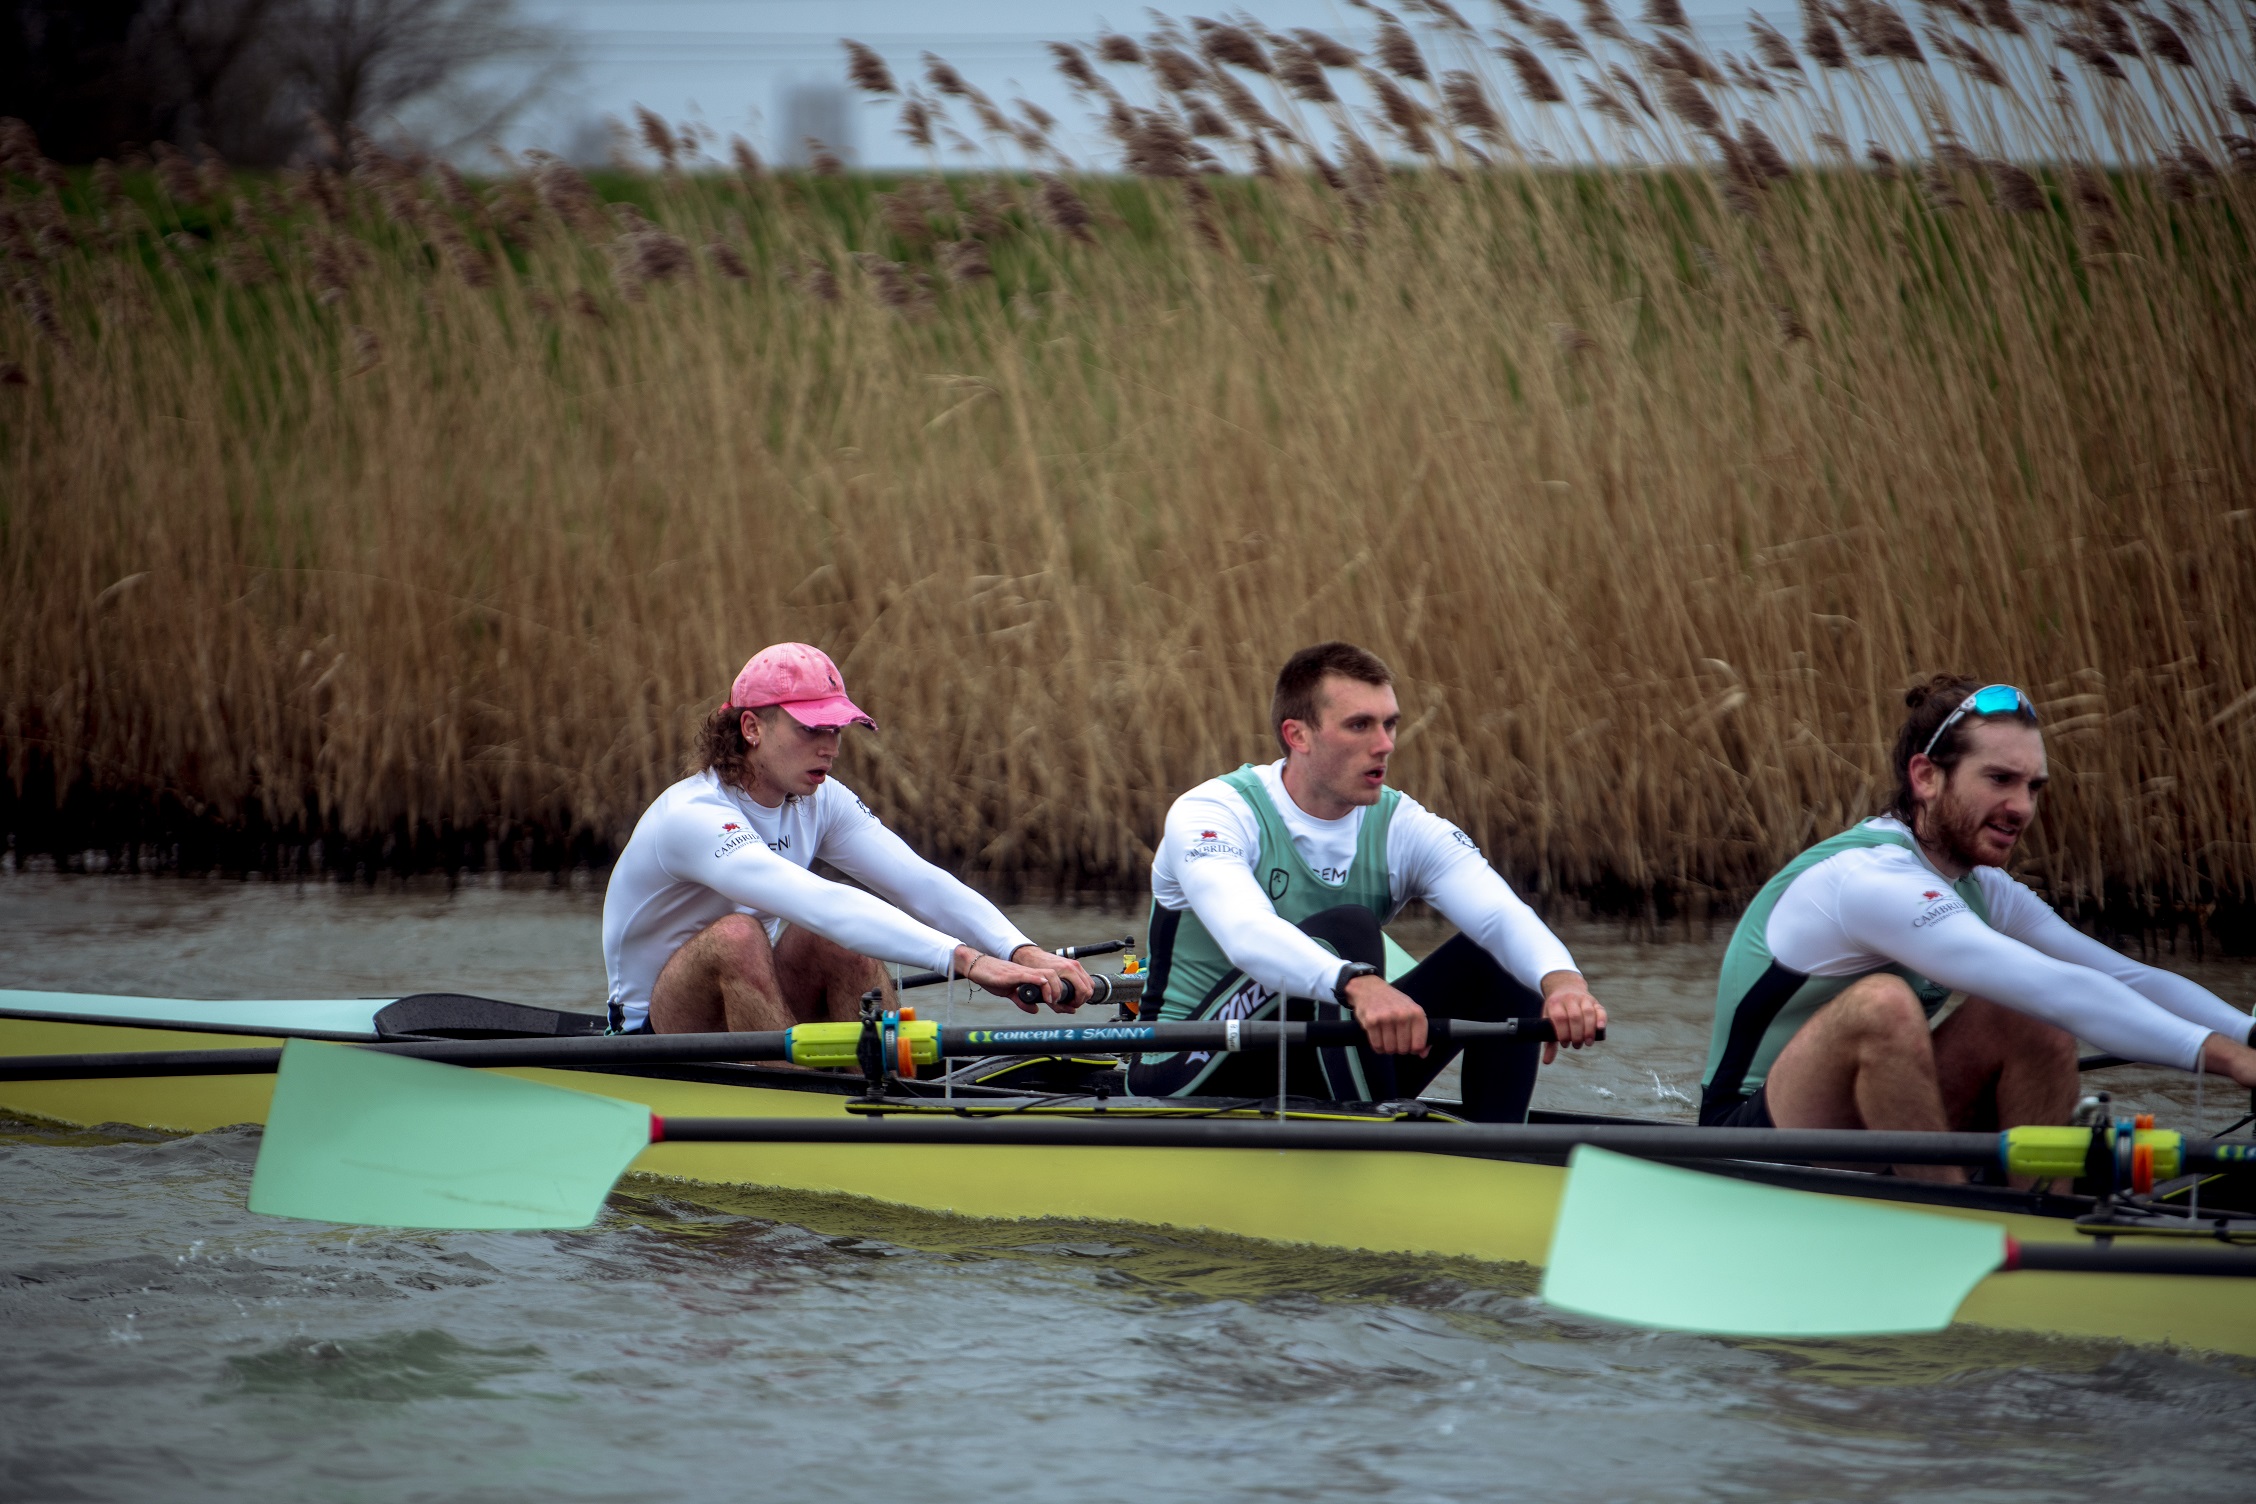 Three rowers, with Ben Dyer in the middle, on the river